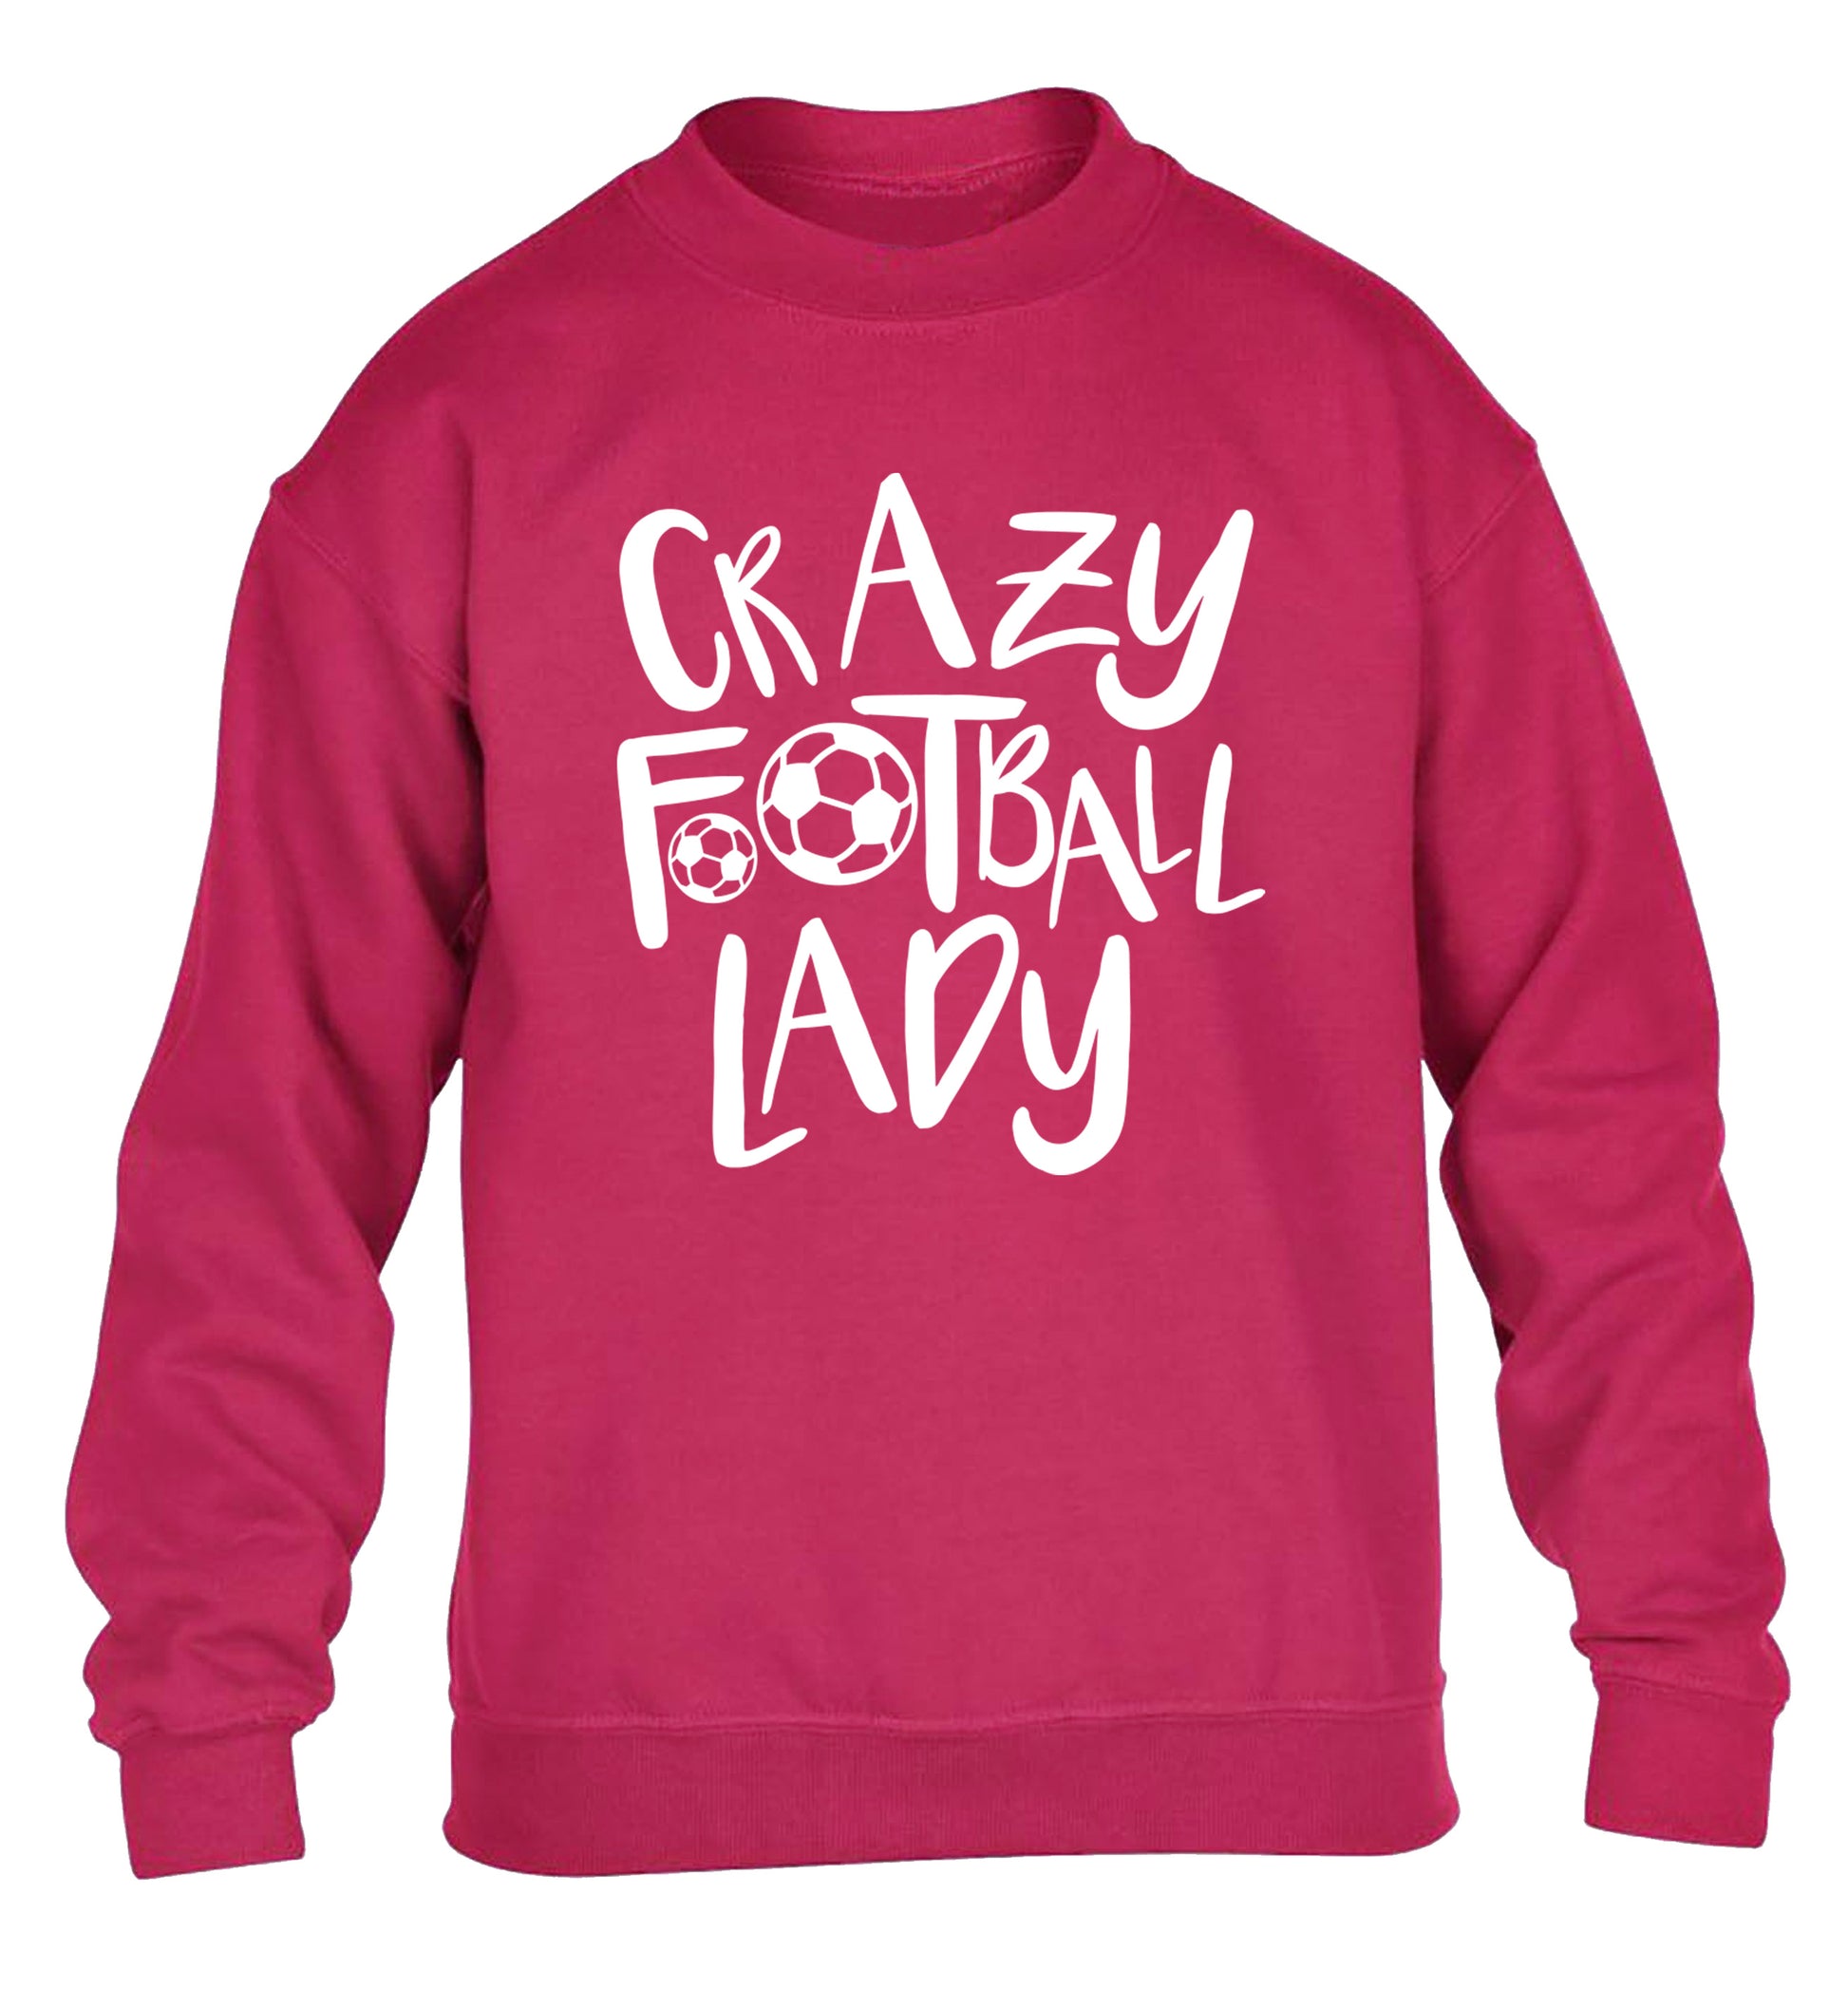 Crazy football lady children's pink sweater 12-14 Years